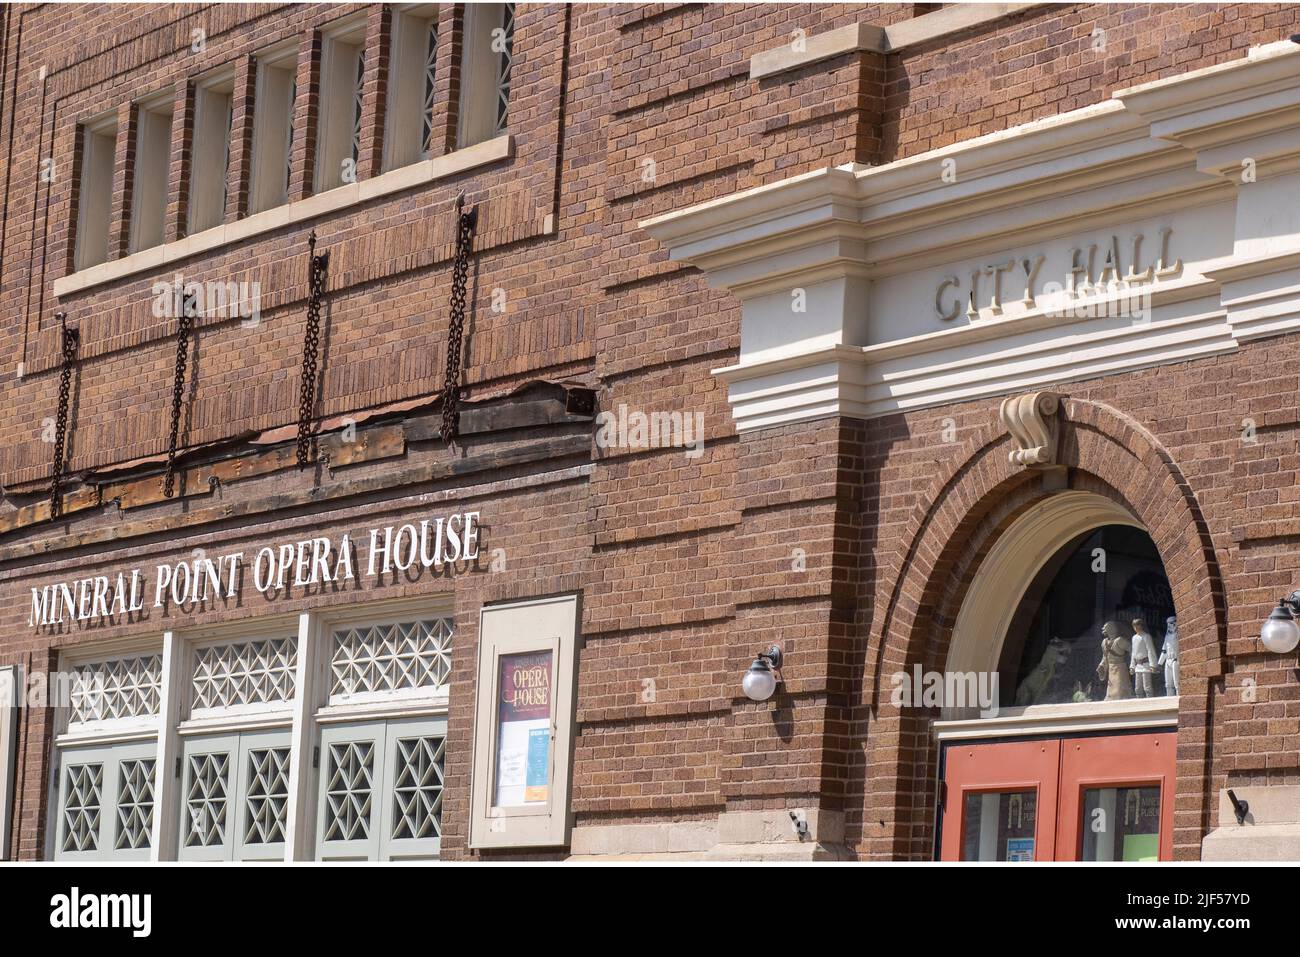 Mineral Point, Wisconsin Mineral Point is a city in Iowa County, Wisconsin, United States. Wisconsin's third oldest city. Mineral Point Opera House. Stock Photo